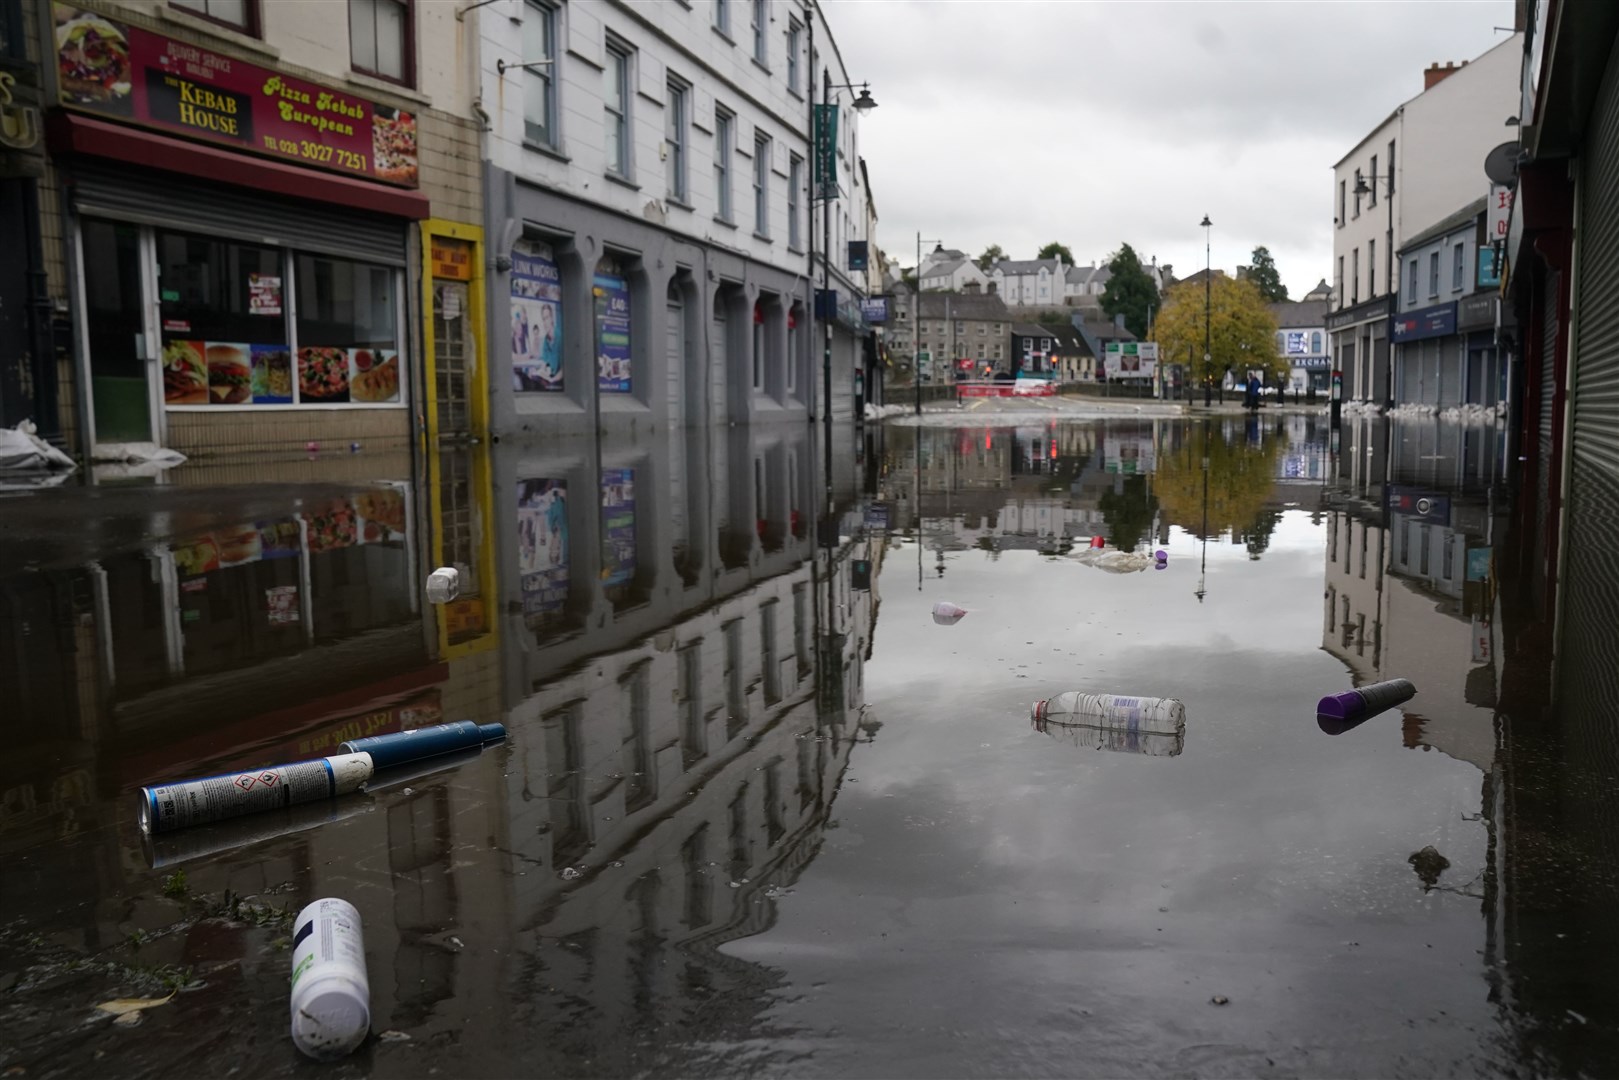 Debris and floodwater in Newry, Co Down after heavy rainfall(Brian Lawless/PA)